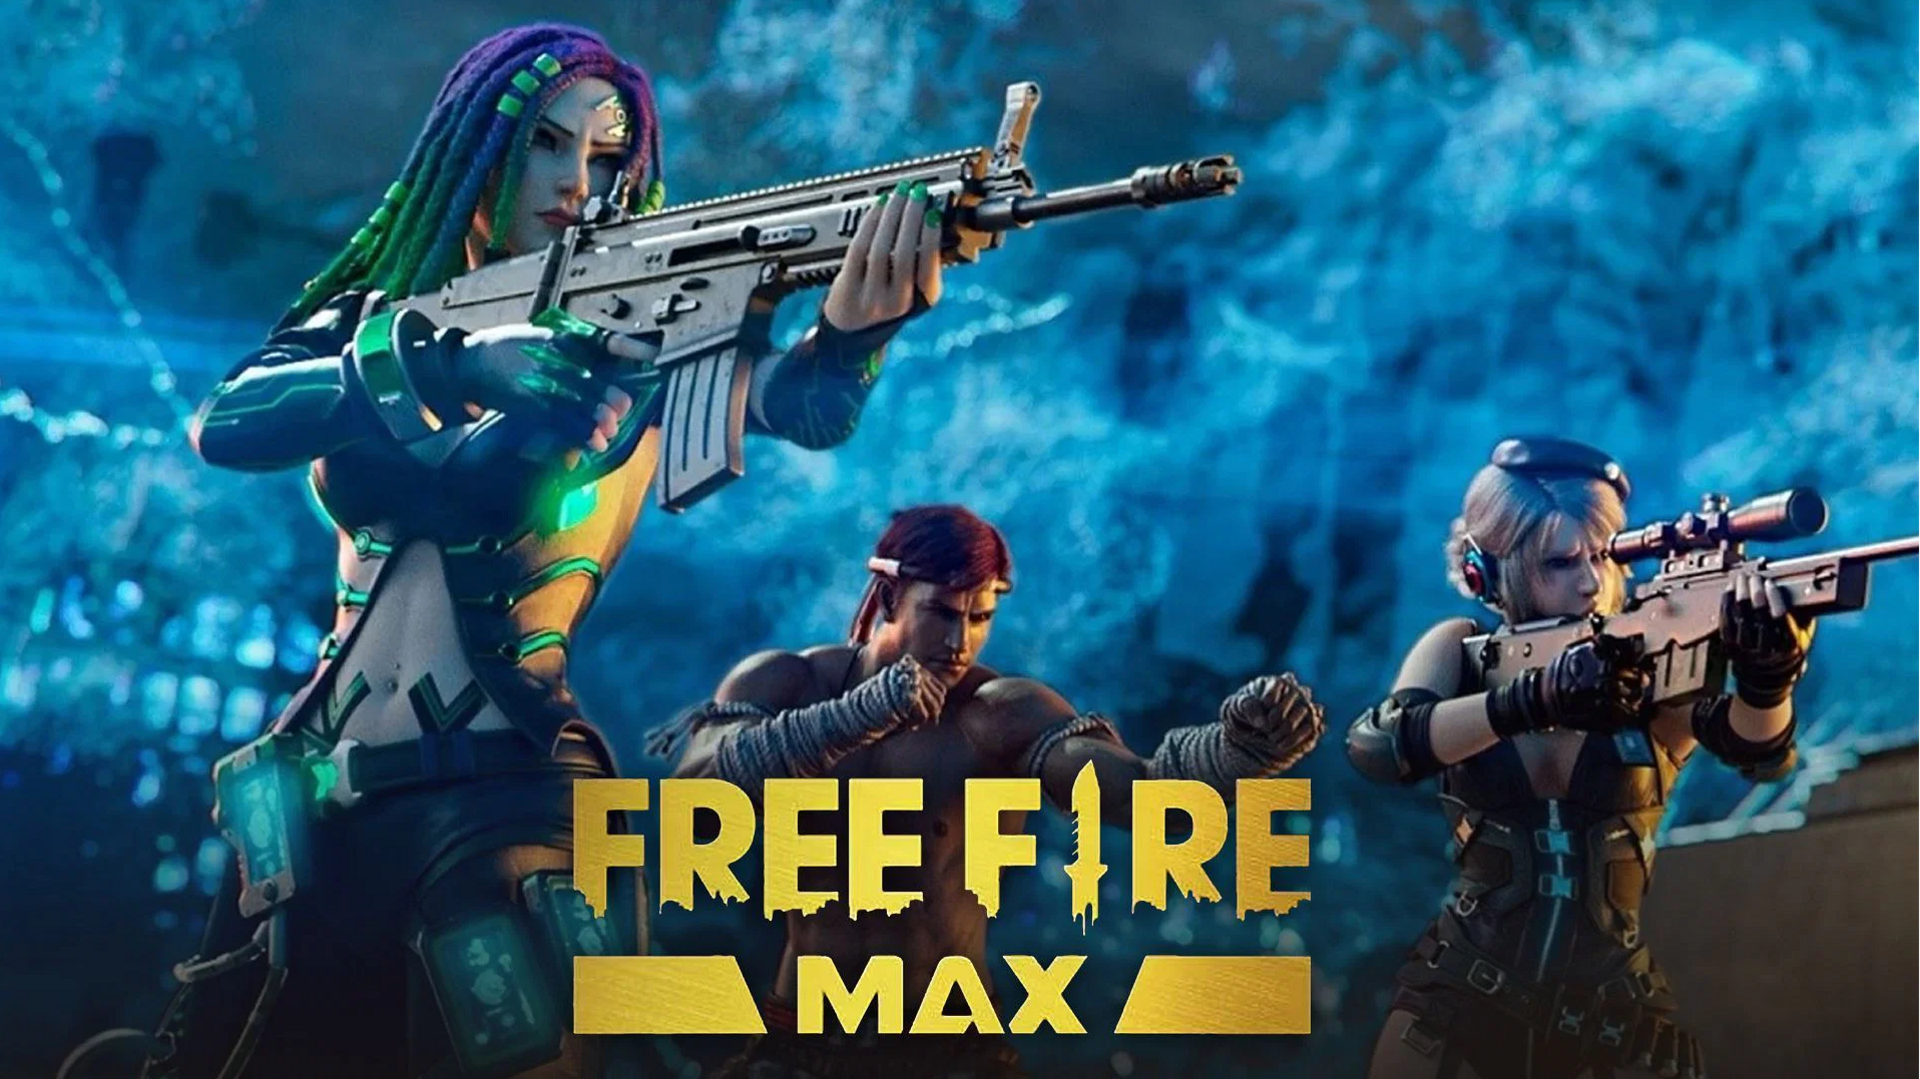 Free Fire MAX codes for November 11: Redeem in-game items